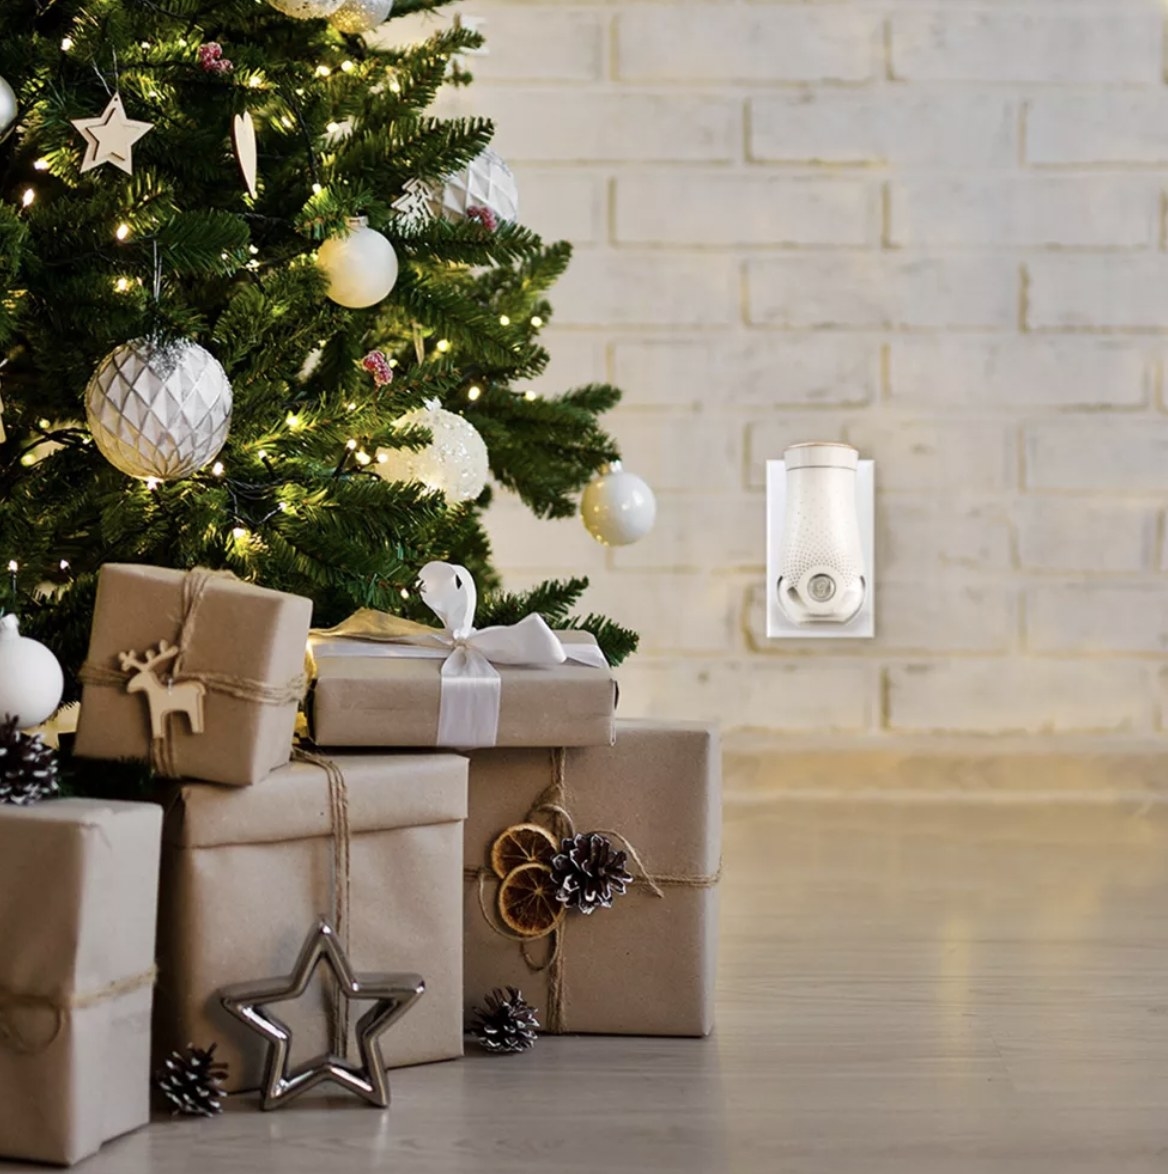 the air freshener plugged into outlet by Christmas tree